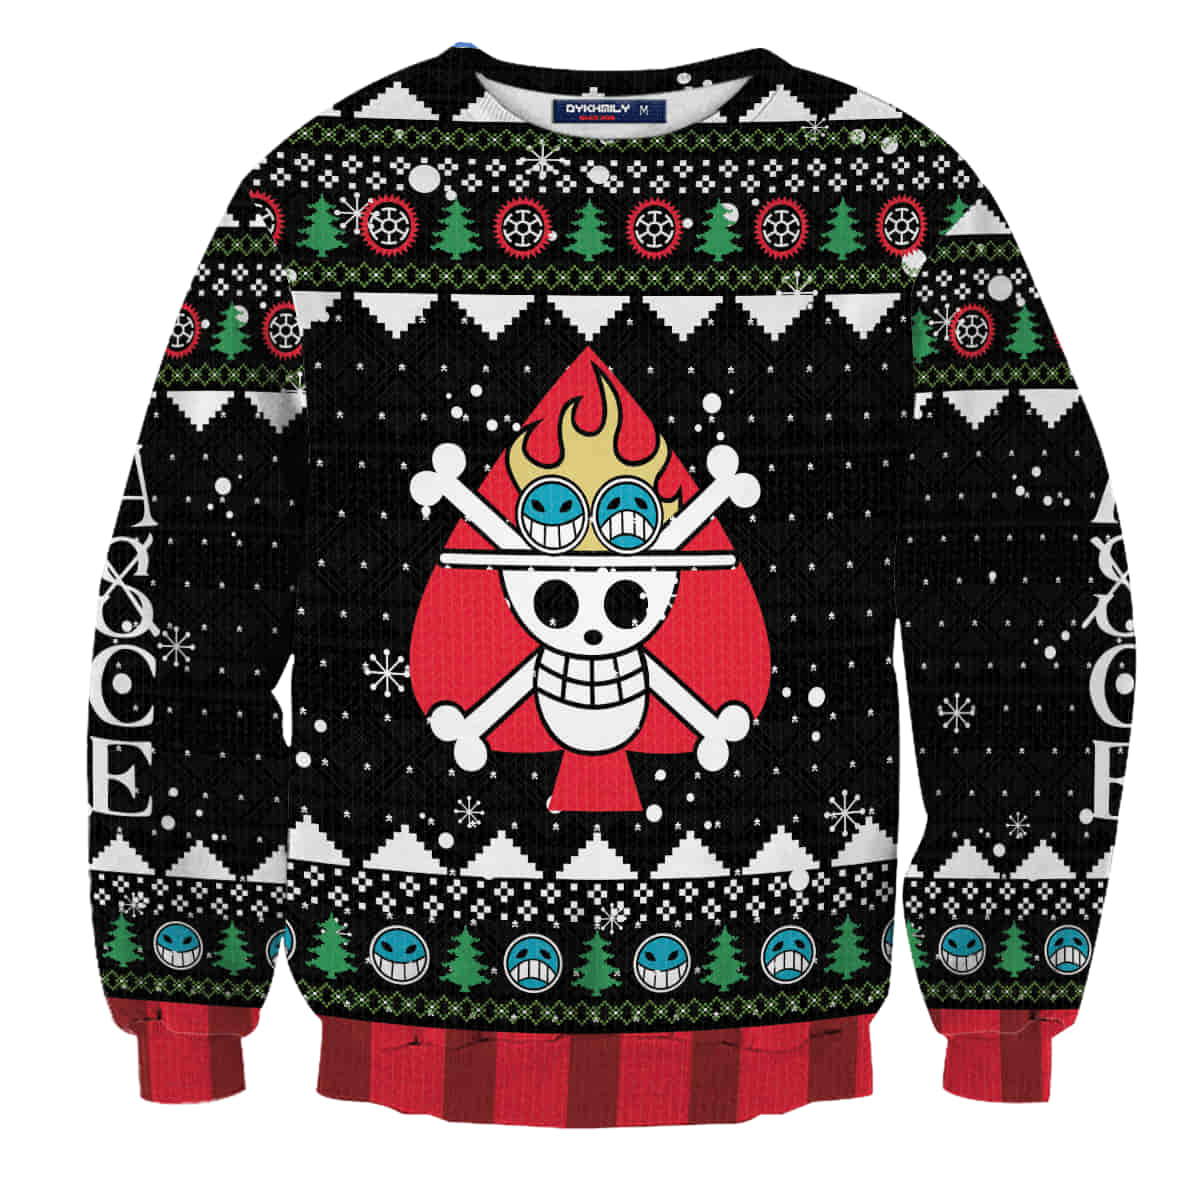 Pirate Ace Wool Knitted Sweater, One Piece 3D Sweater